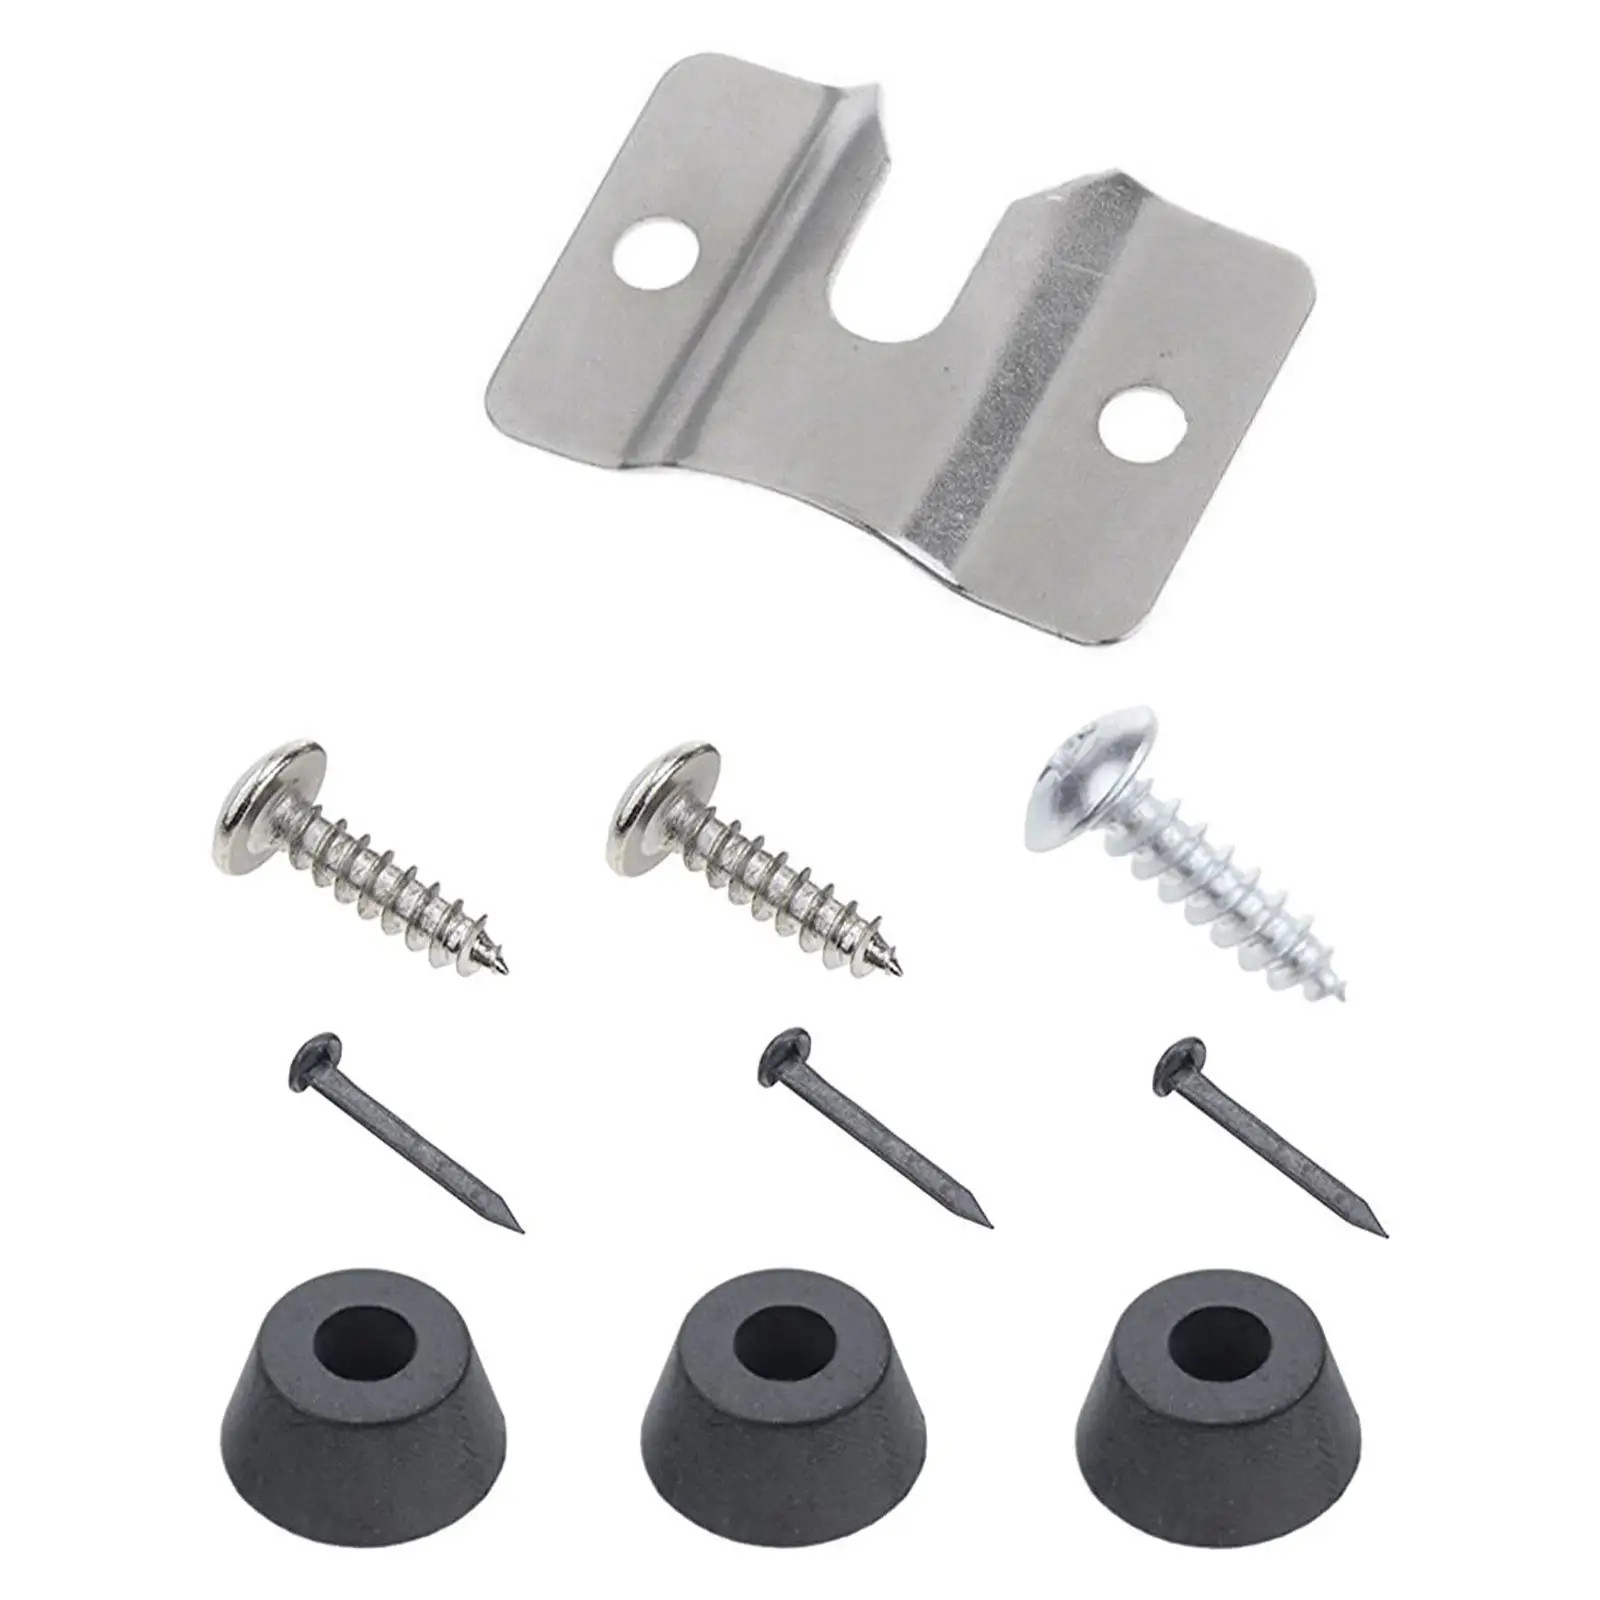  Board Hanging Kit, Wall Mounting Bracket Stainless Steel Sturdy with 3Pcs Small Fine Nails  Boards Holder for  Replacement